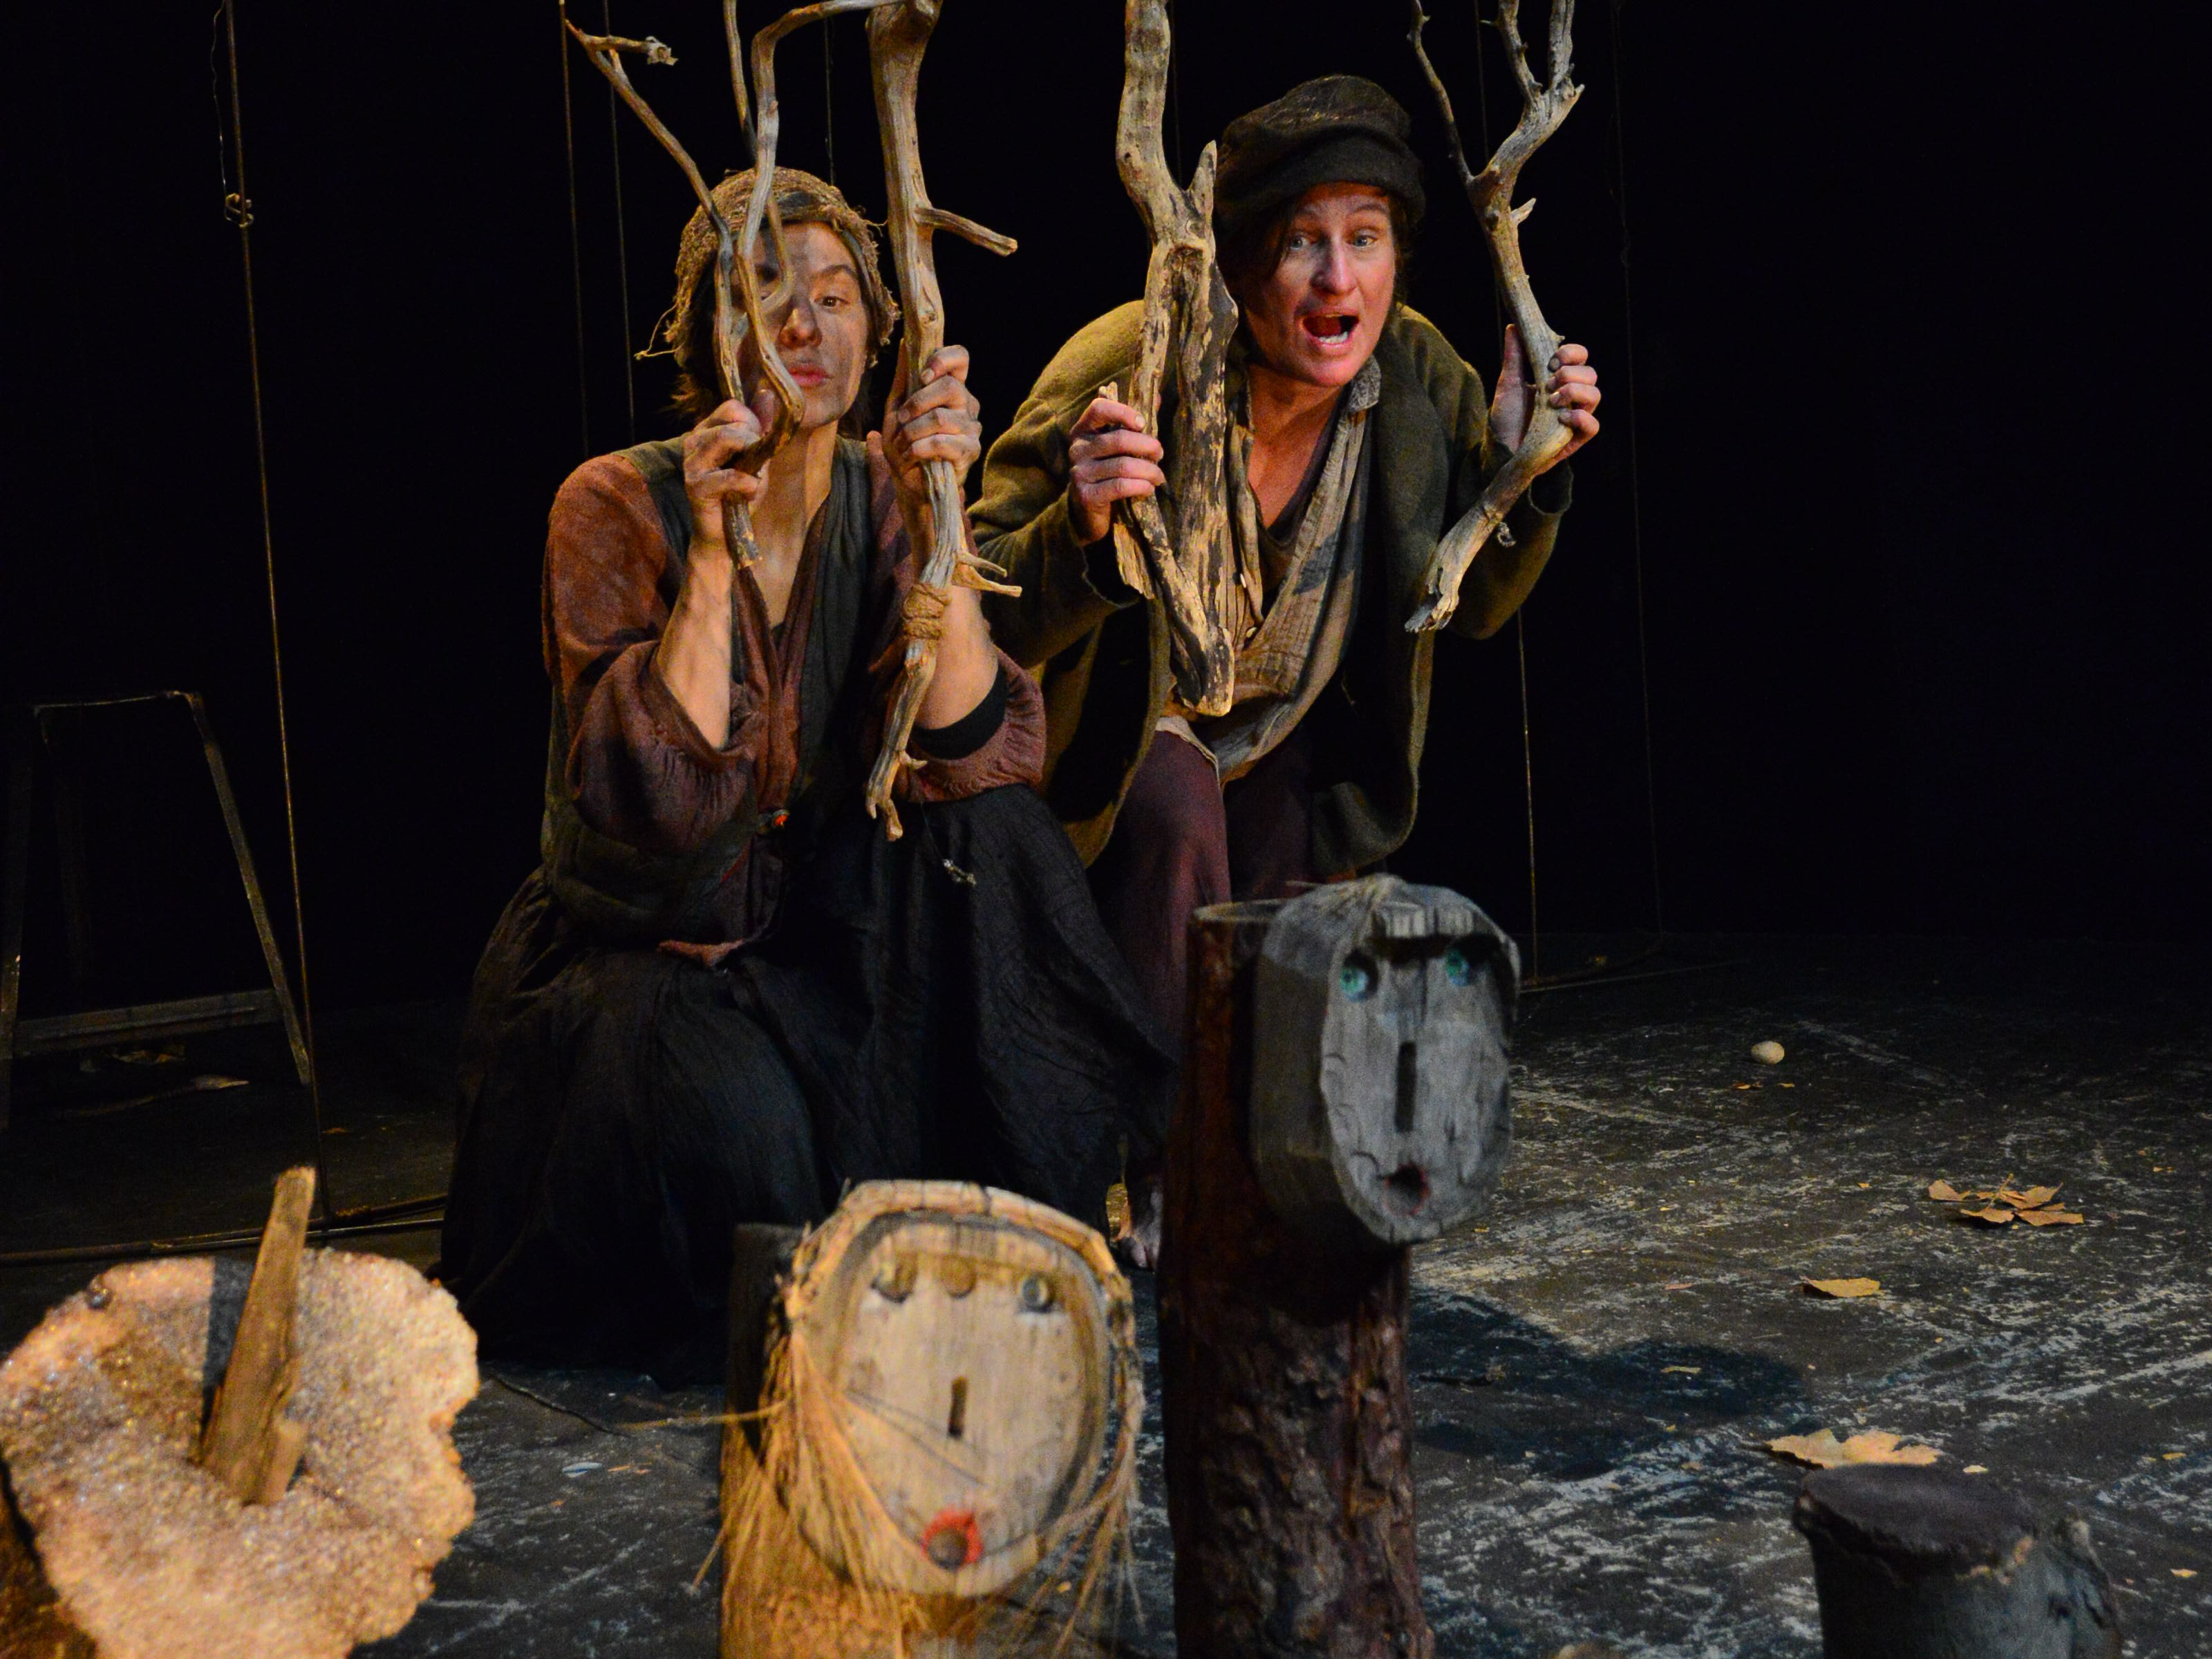 Hansel and Gretel stand with dirty faces behind a few wooden branches that suggest a cage. In front of them are two pieces of tree trunk with minimalist drawn faces.